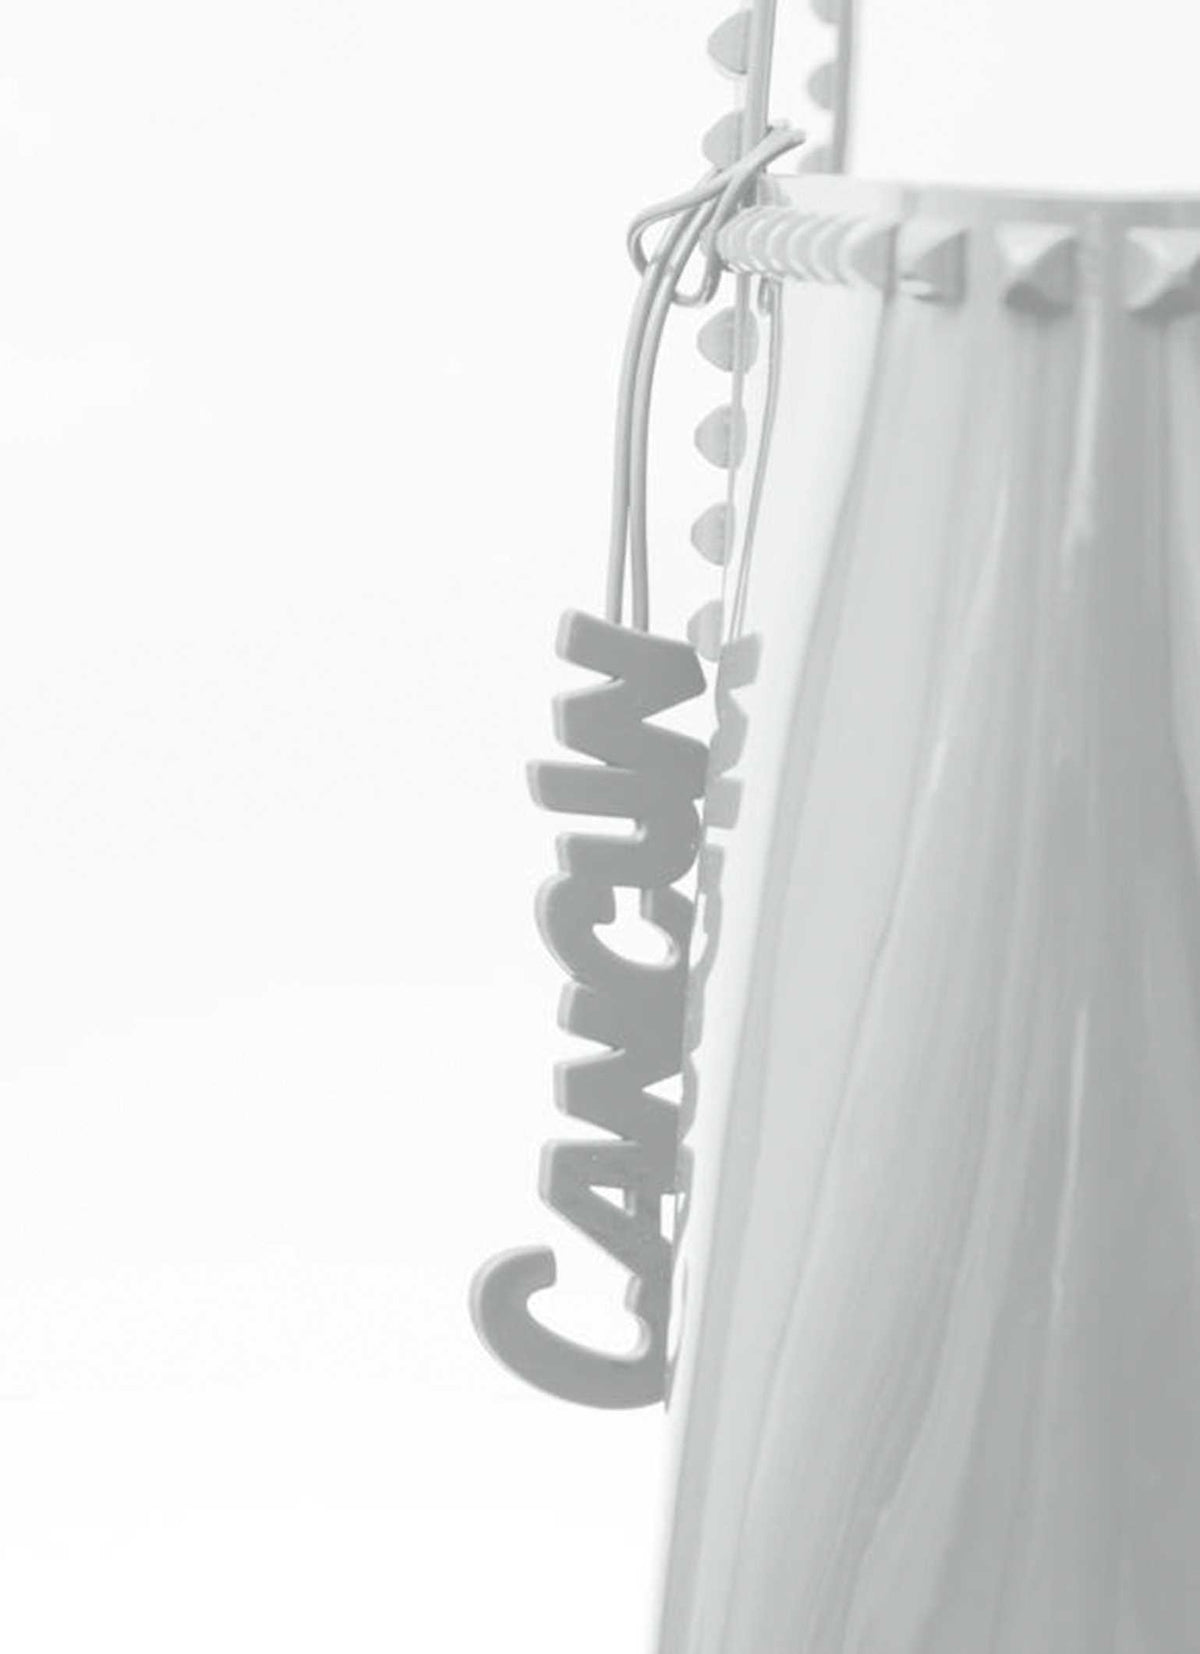 Carmen Sol Cancun jelly charms for purses in color white